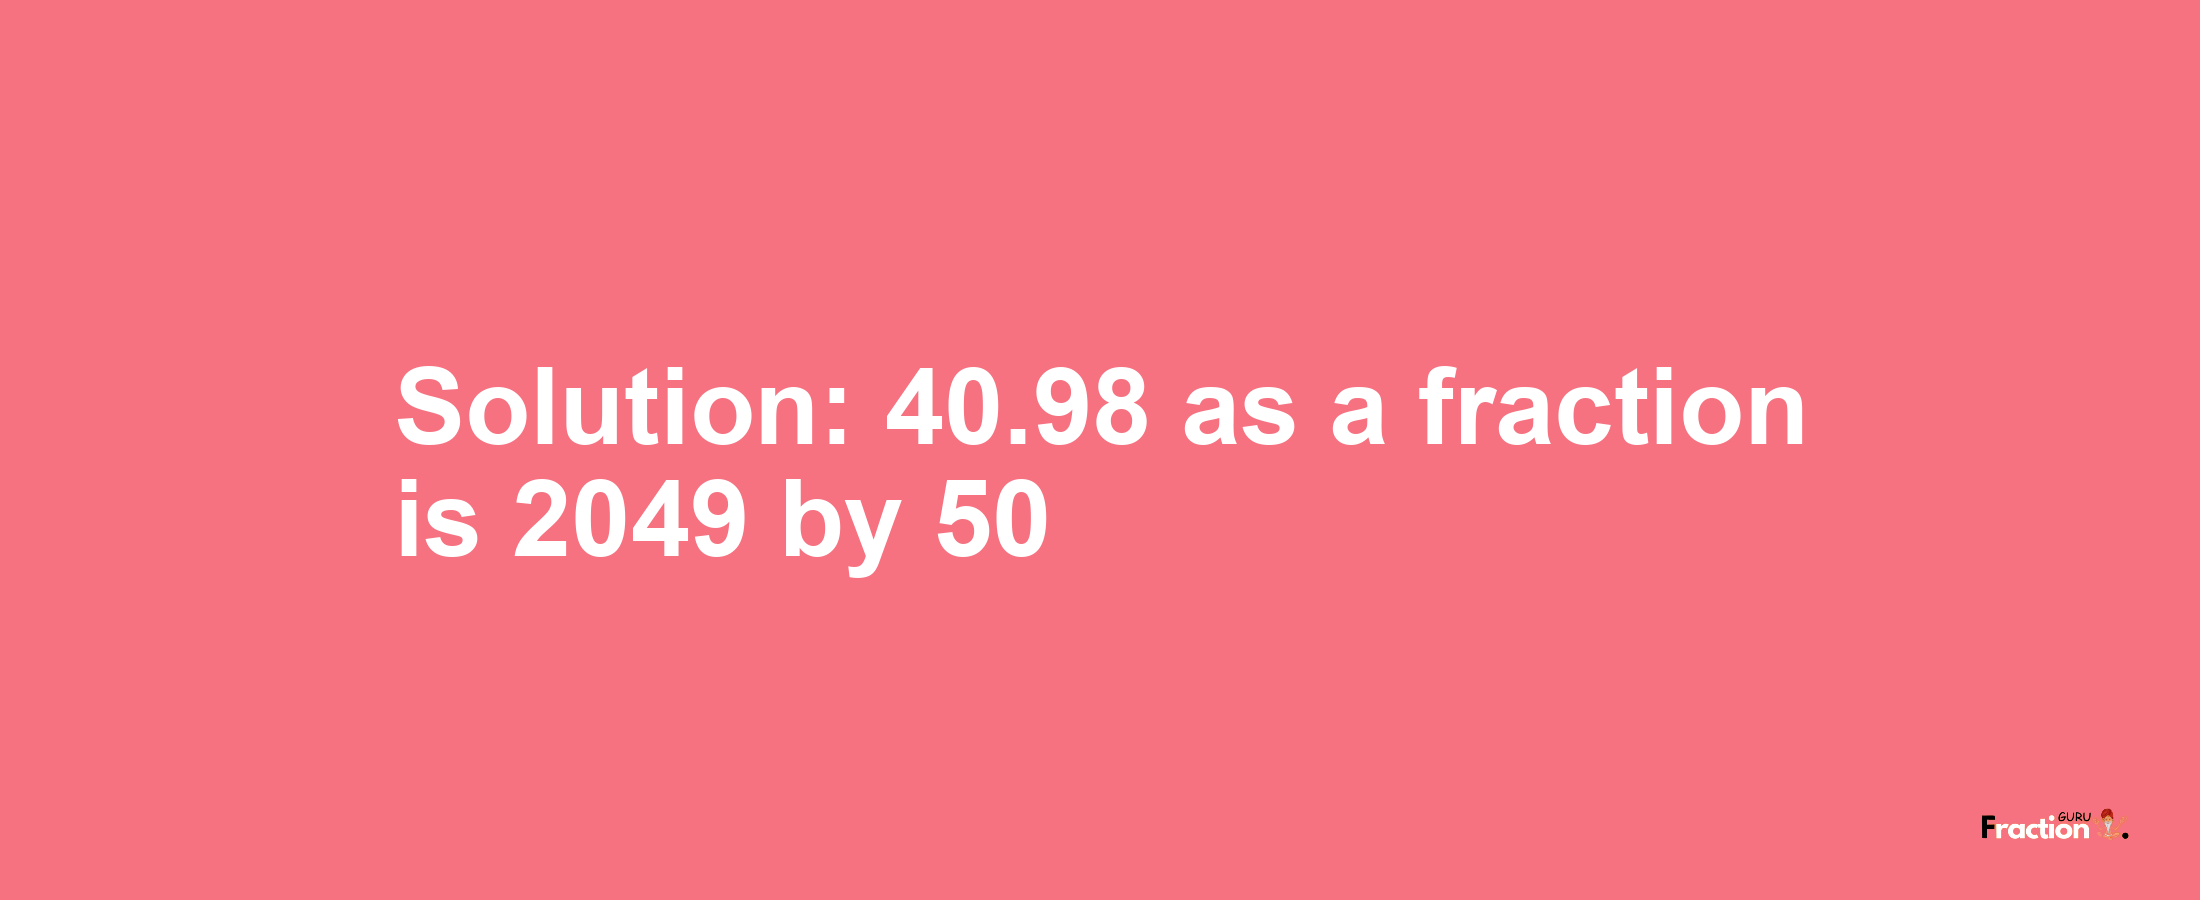 Solution:40.98 as a fraction is 2049/50